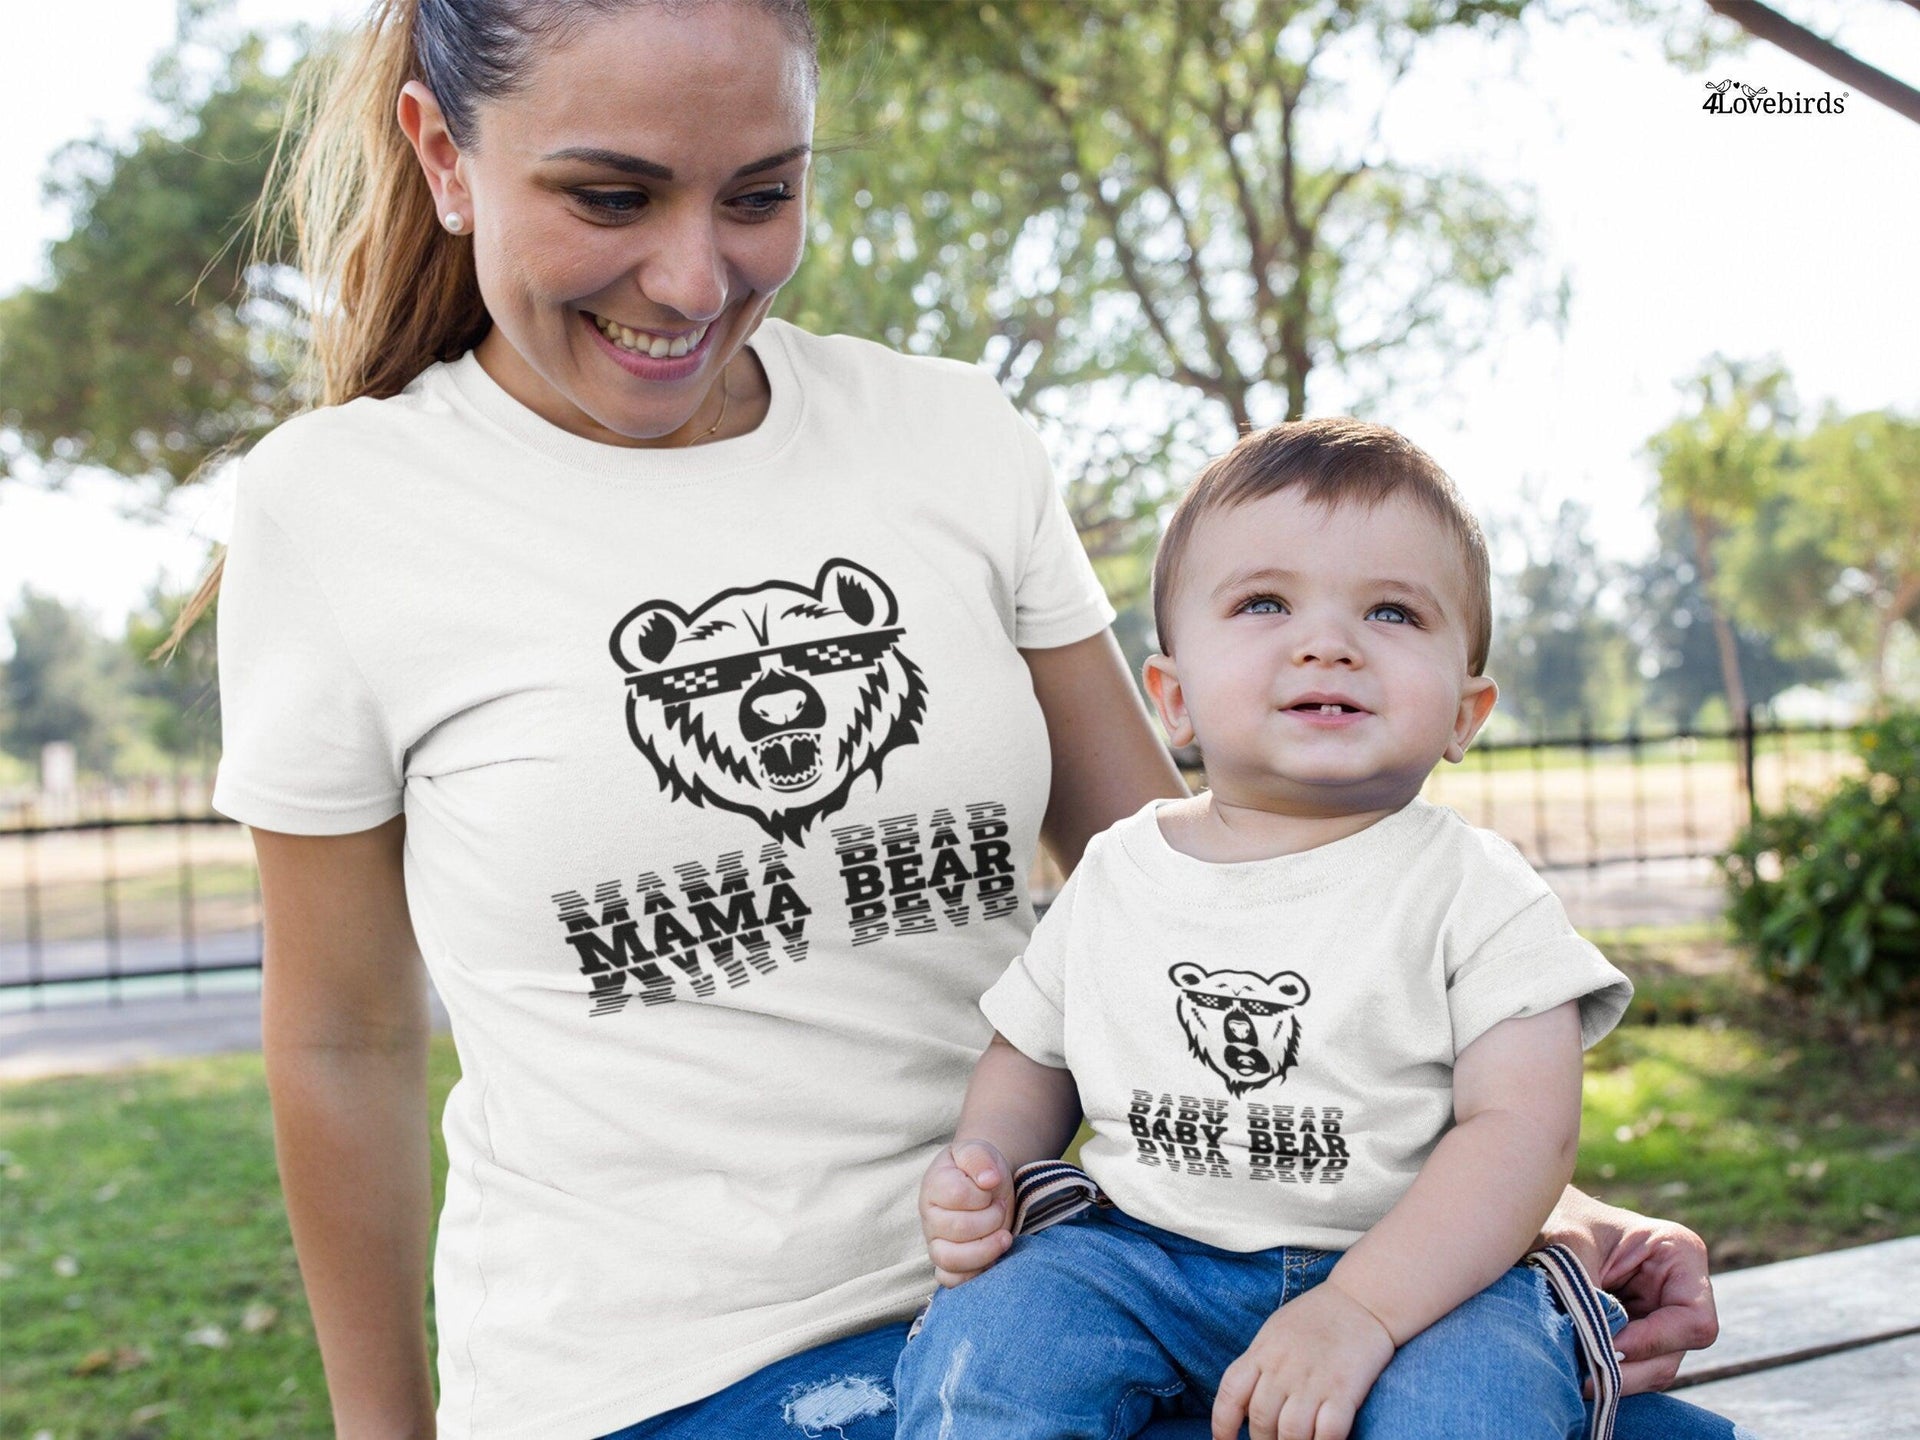 https://4lovebirds.com/cdn/shop/files/papa-bear-mama-bear-and-baby-bear-dad-mom-and-child-matching-shirts-daddy-mommy-and-me-4lovebirds-1_216a18bf-4d9d-474a-87dc-e0608cba4175.jpg?v=1689395953&width=1920